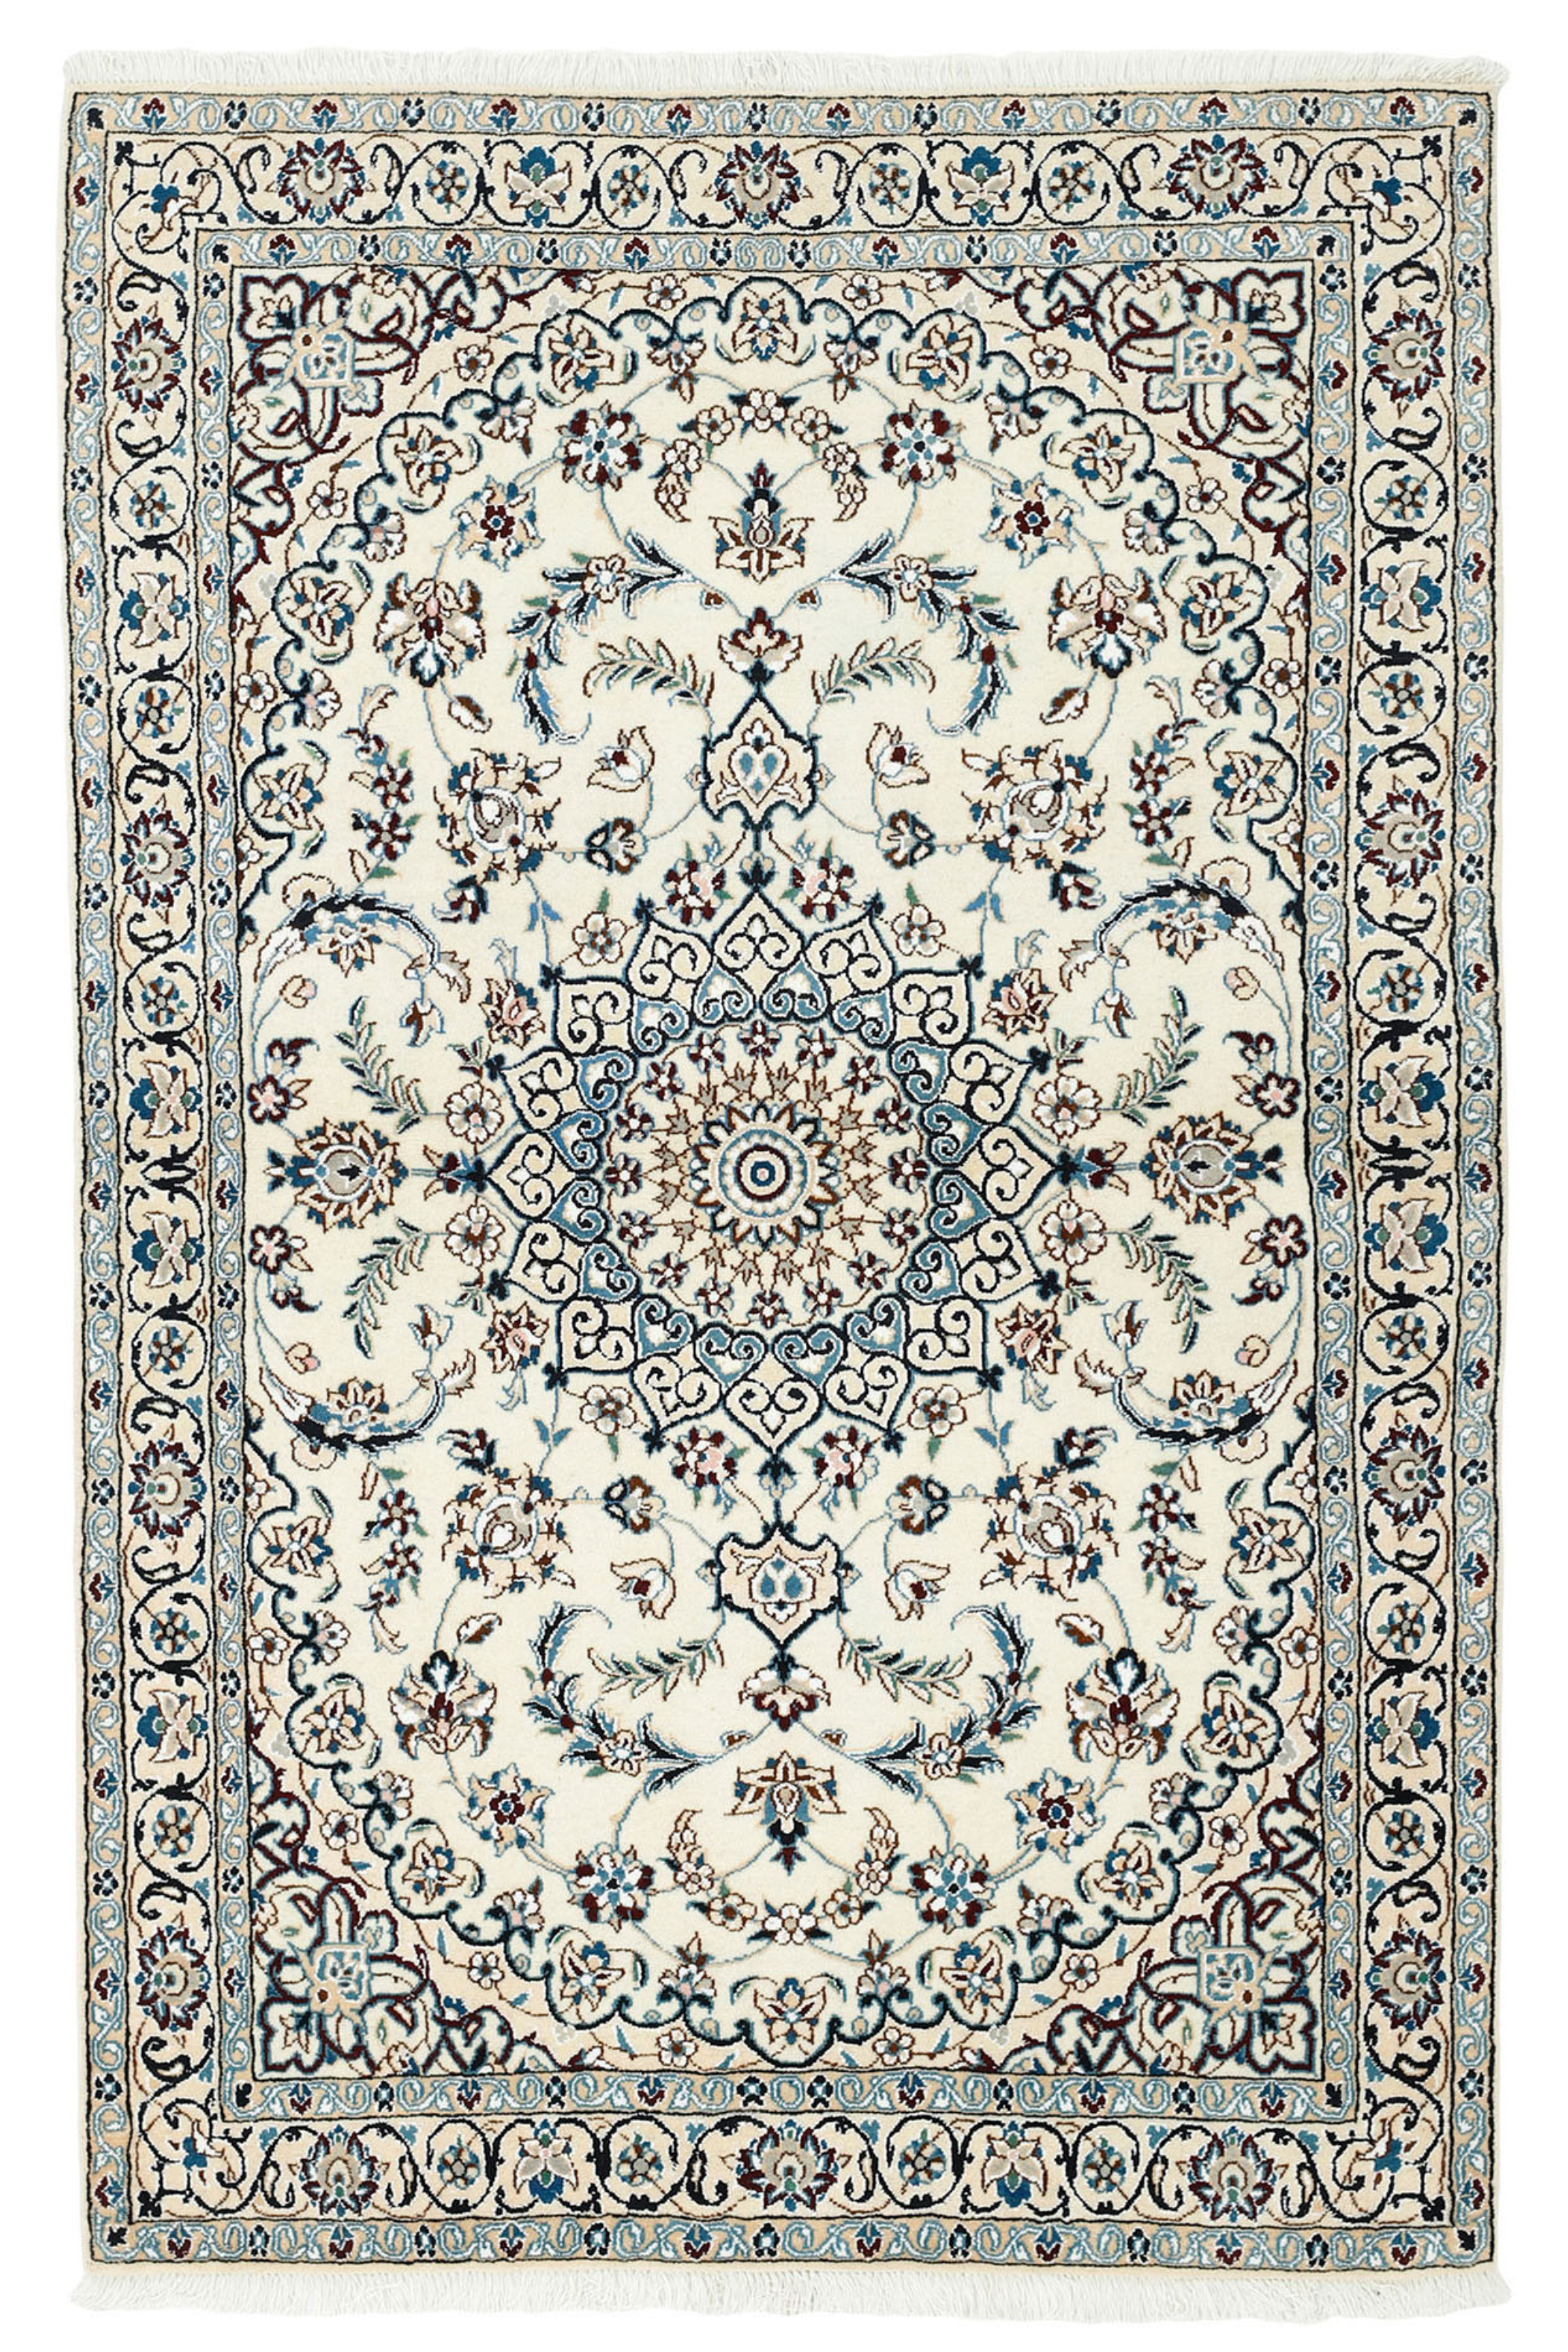 Traditional luxury Nain 9 LA rug in cream and blue tones